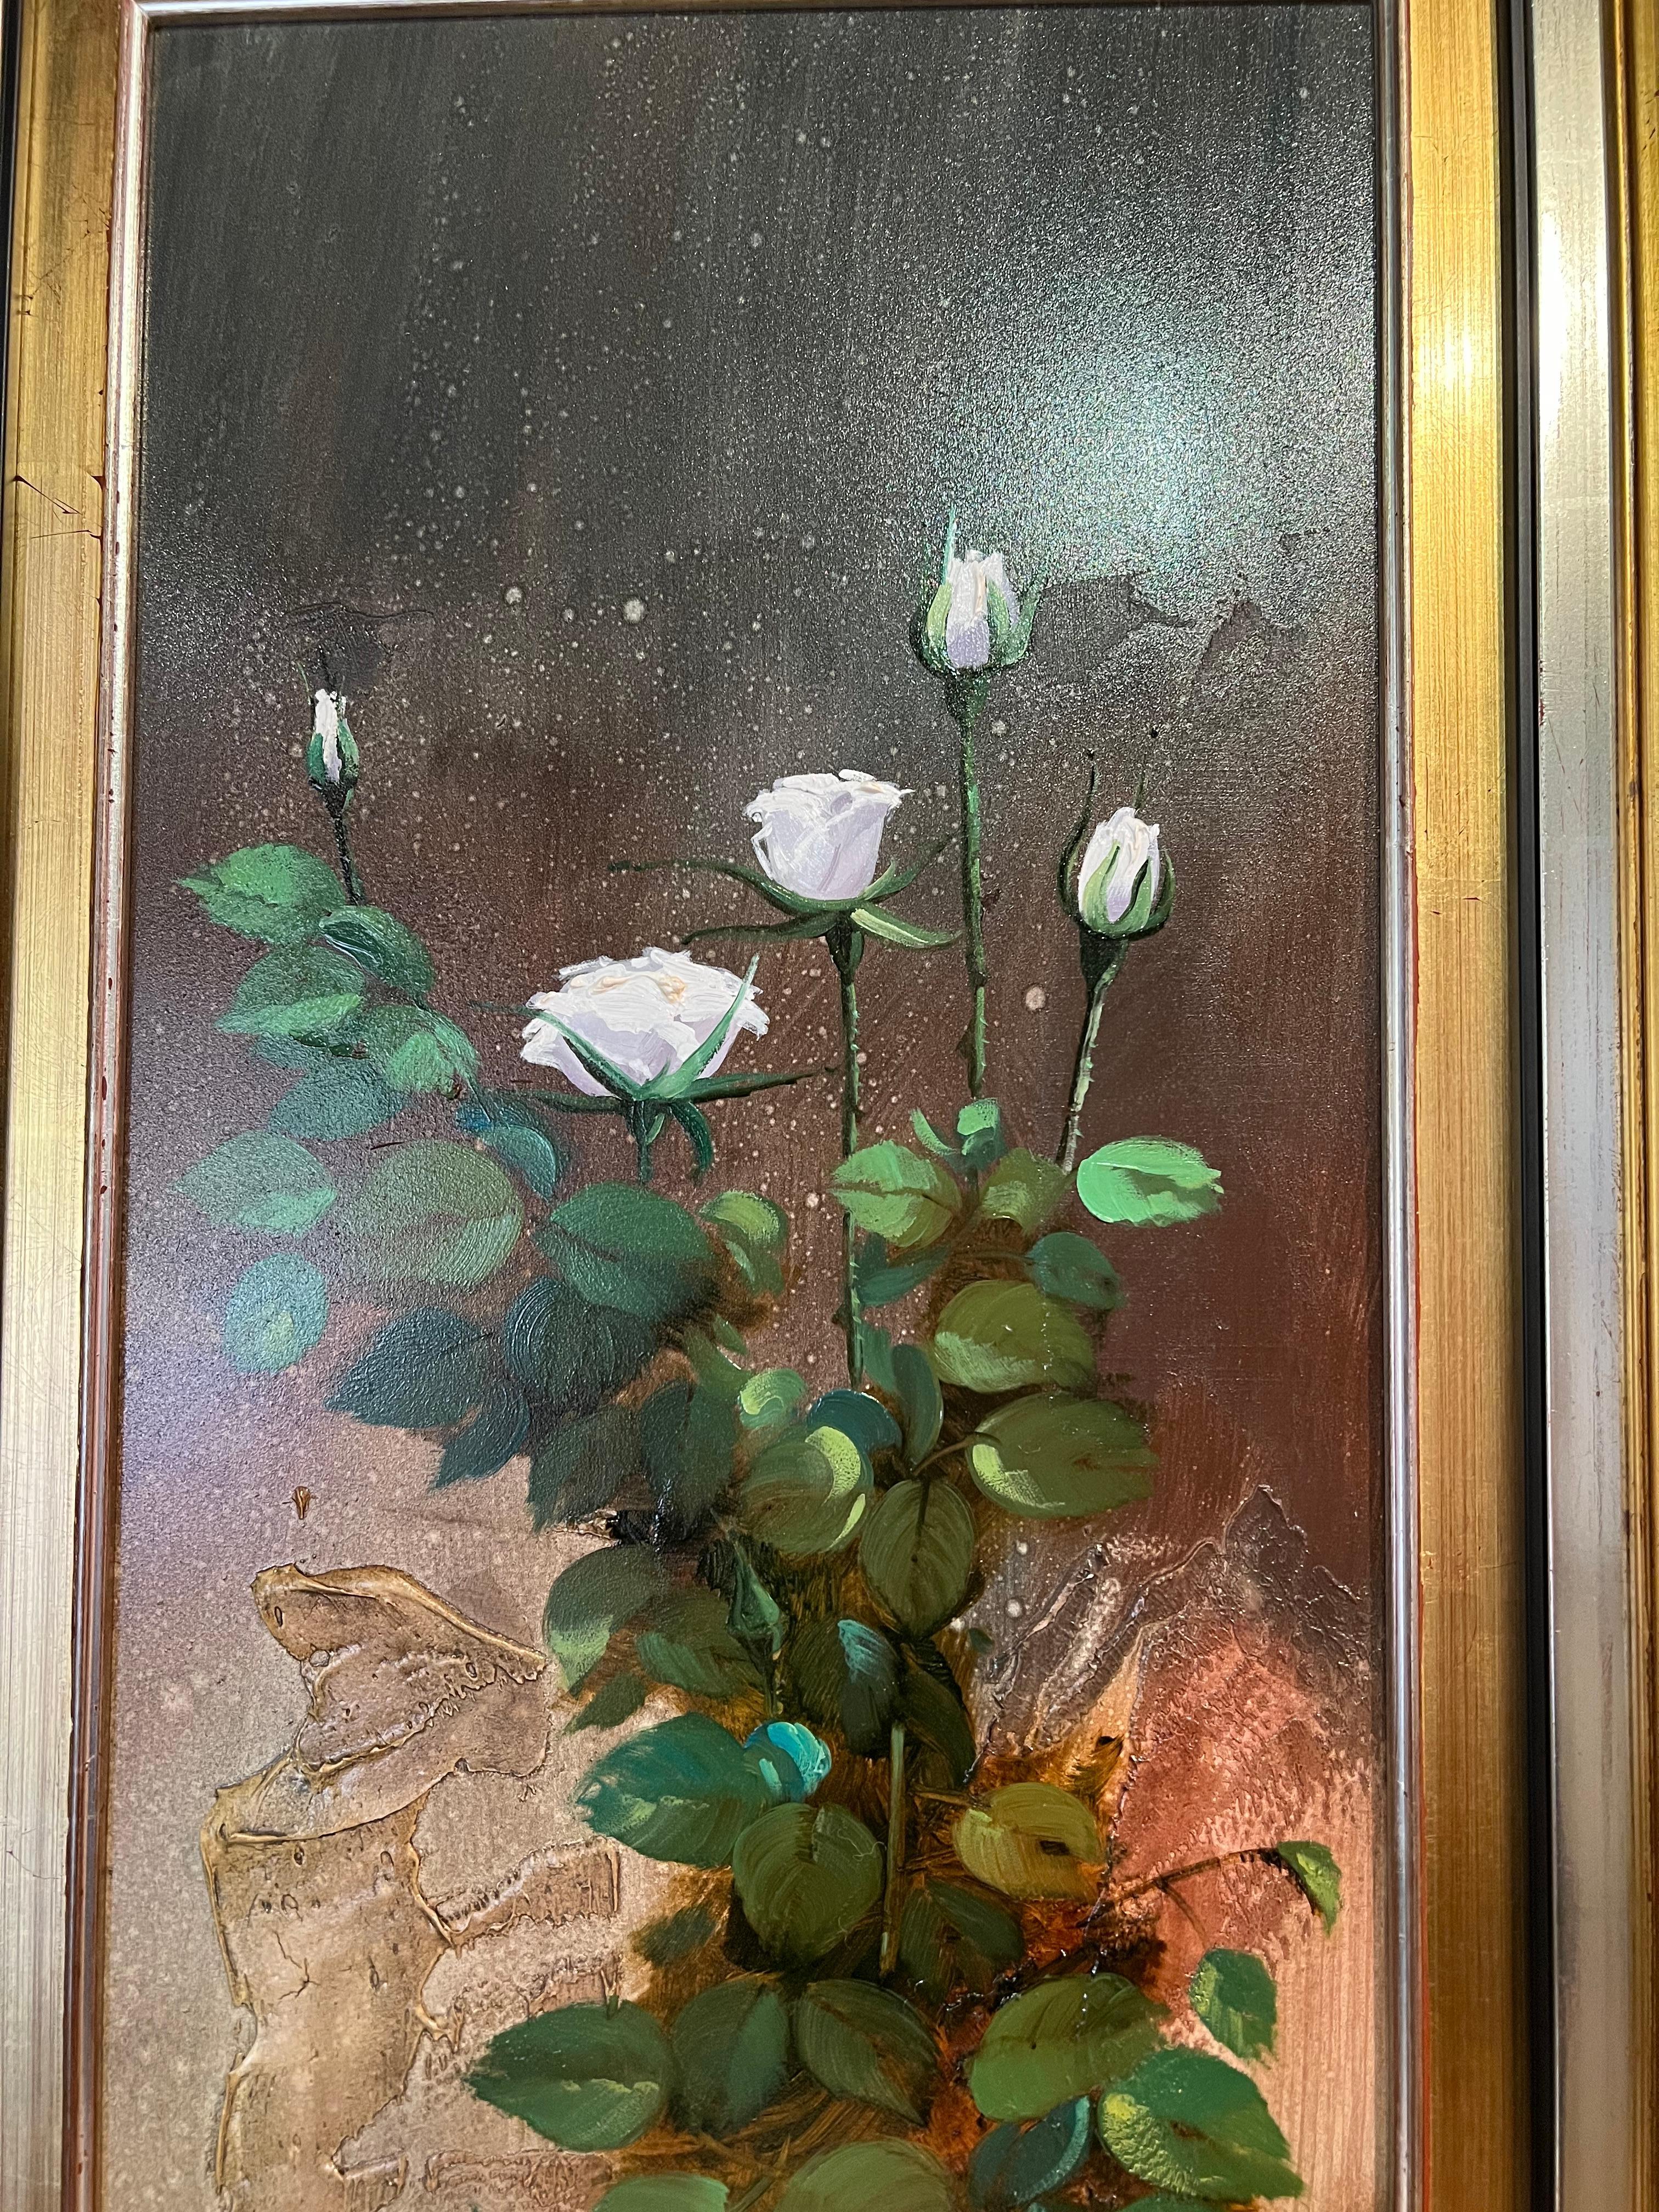 Roses growing on Stucco Wall - Painting by Fernando Alcaraz